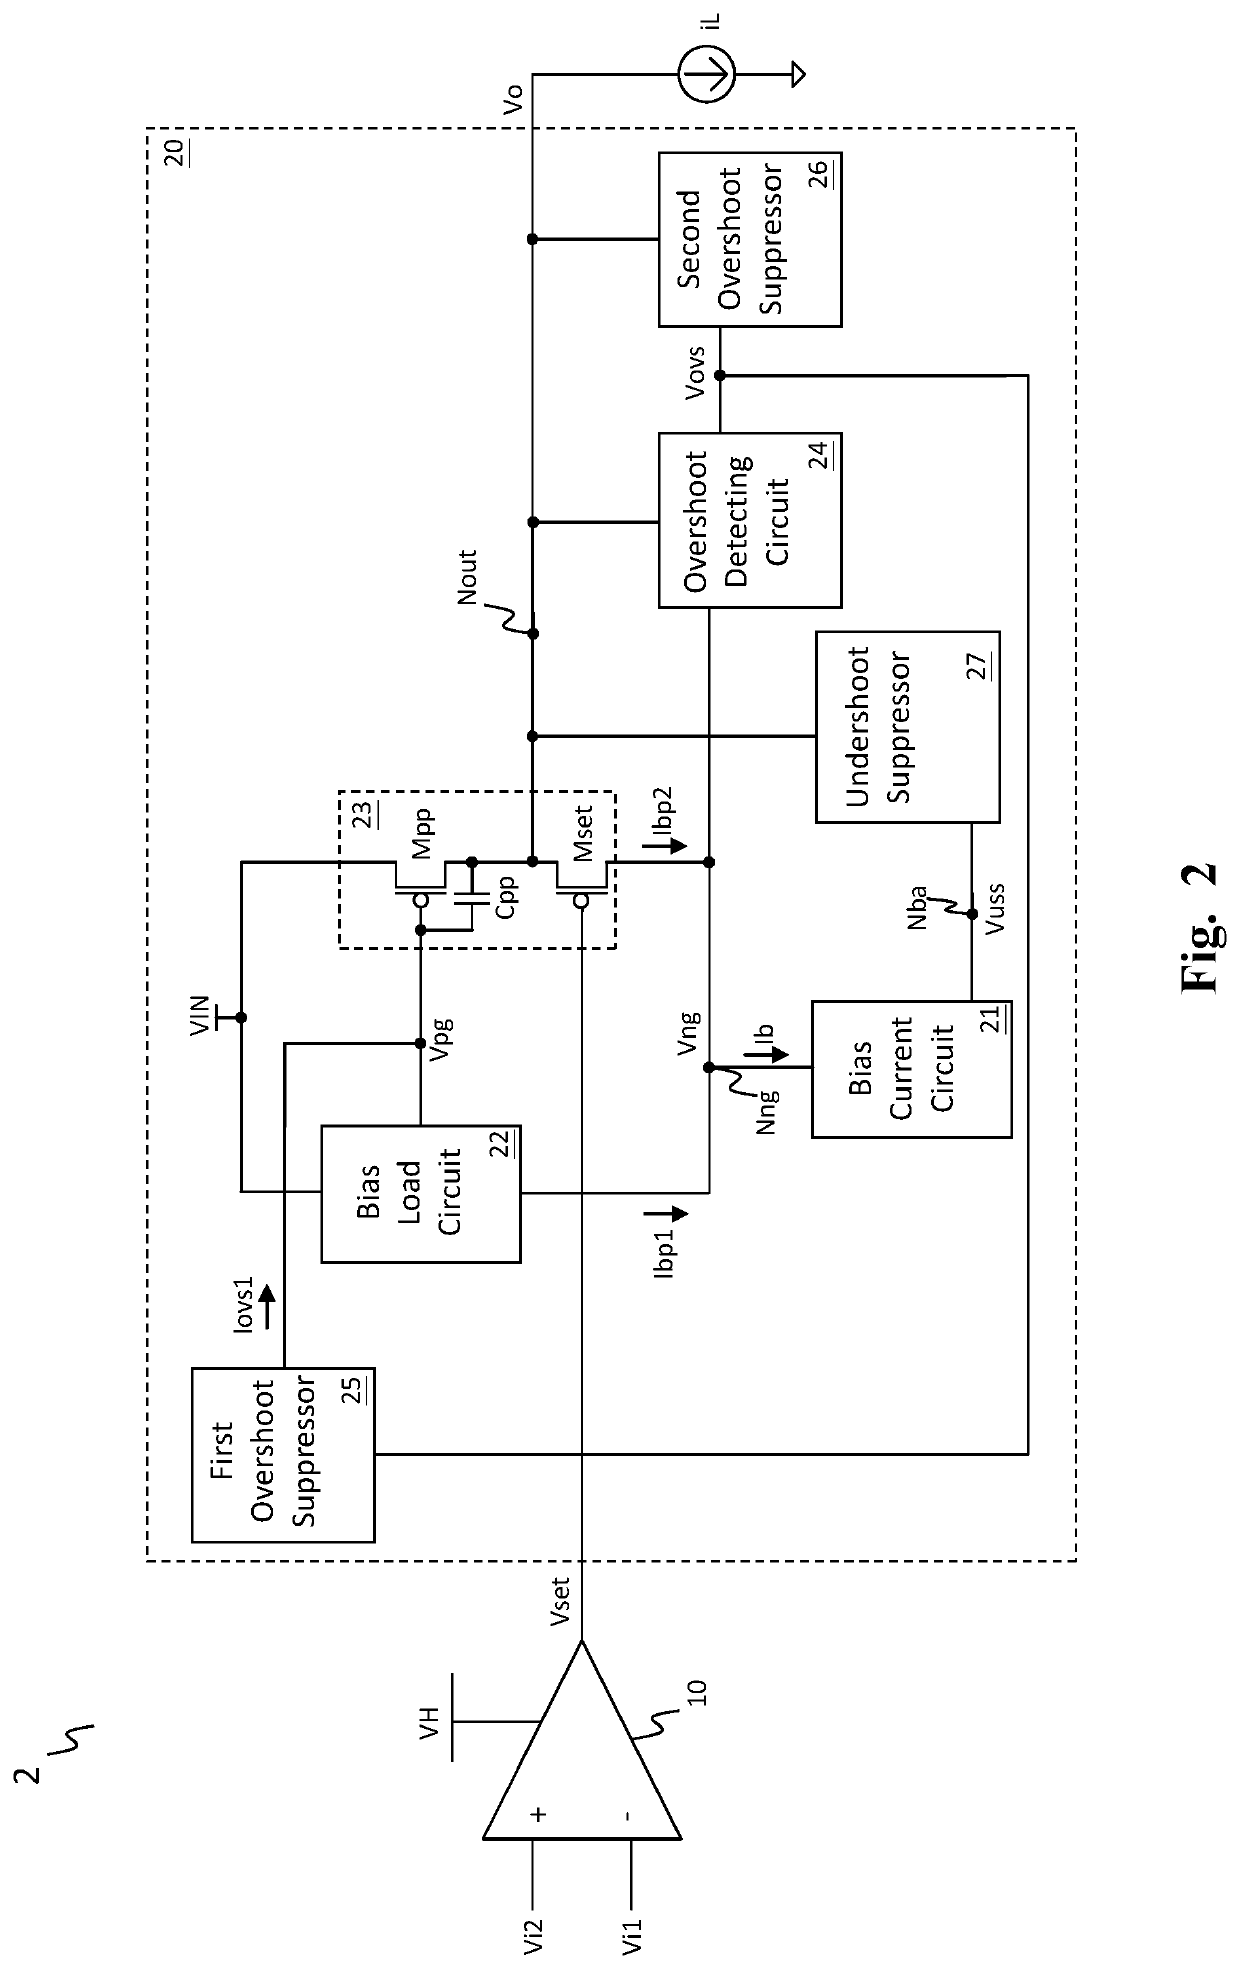 Fast response linear regulator with bias current control and overshoot and undershoot suppression